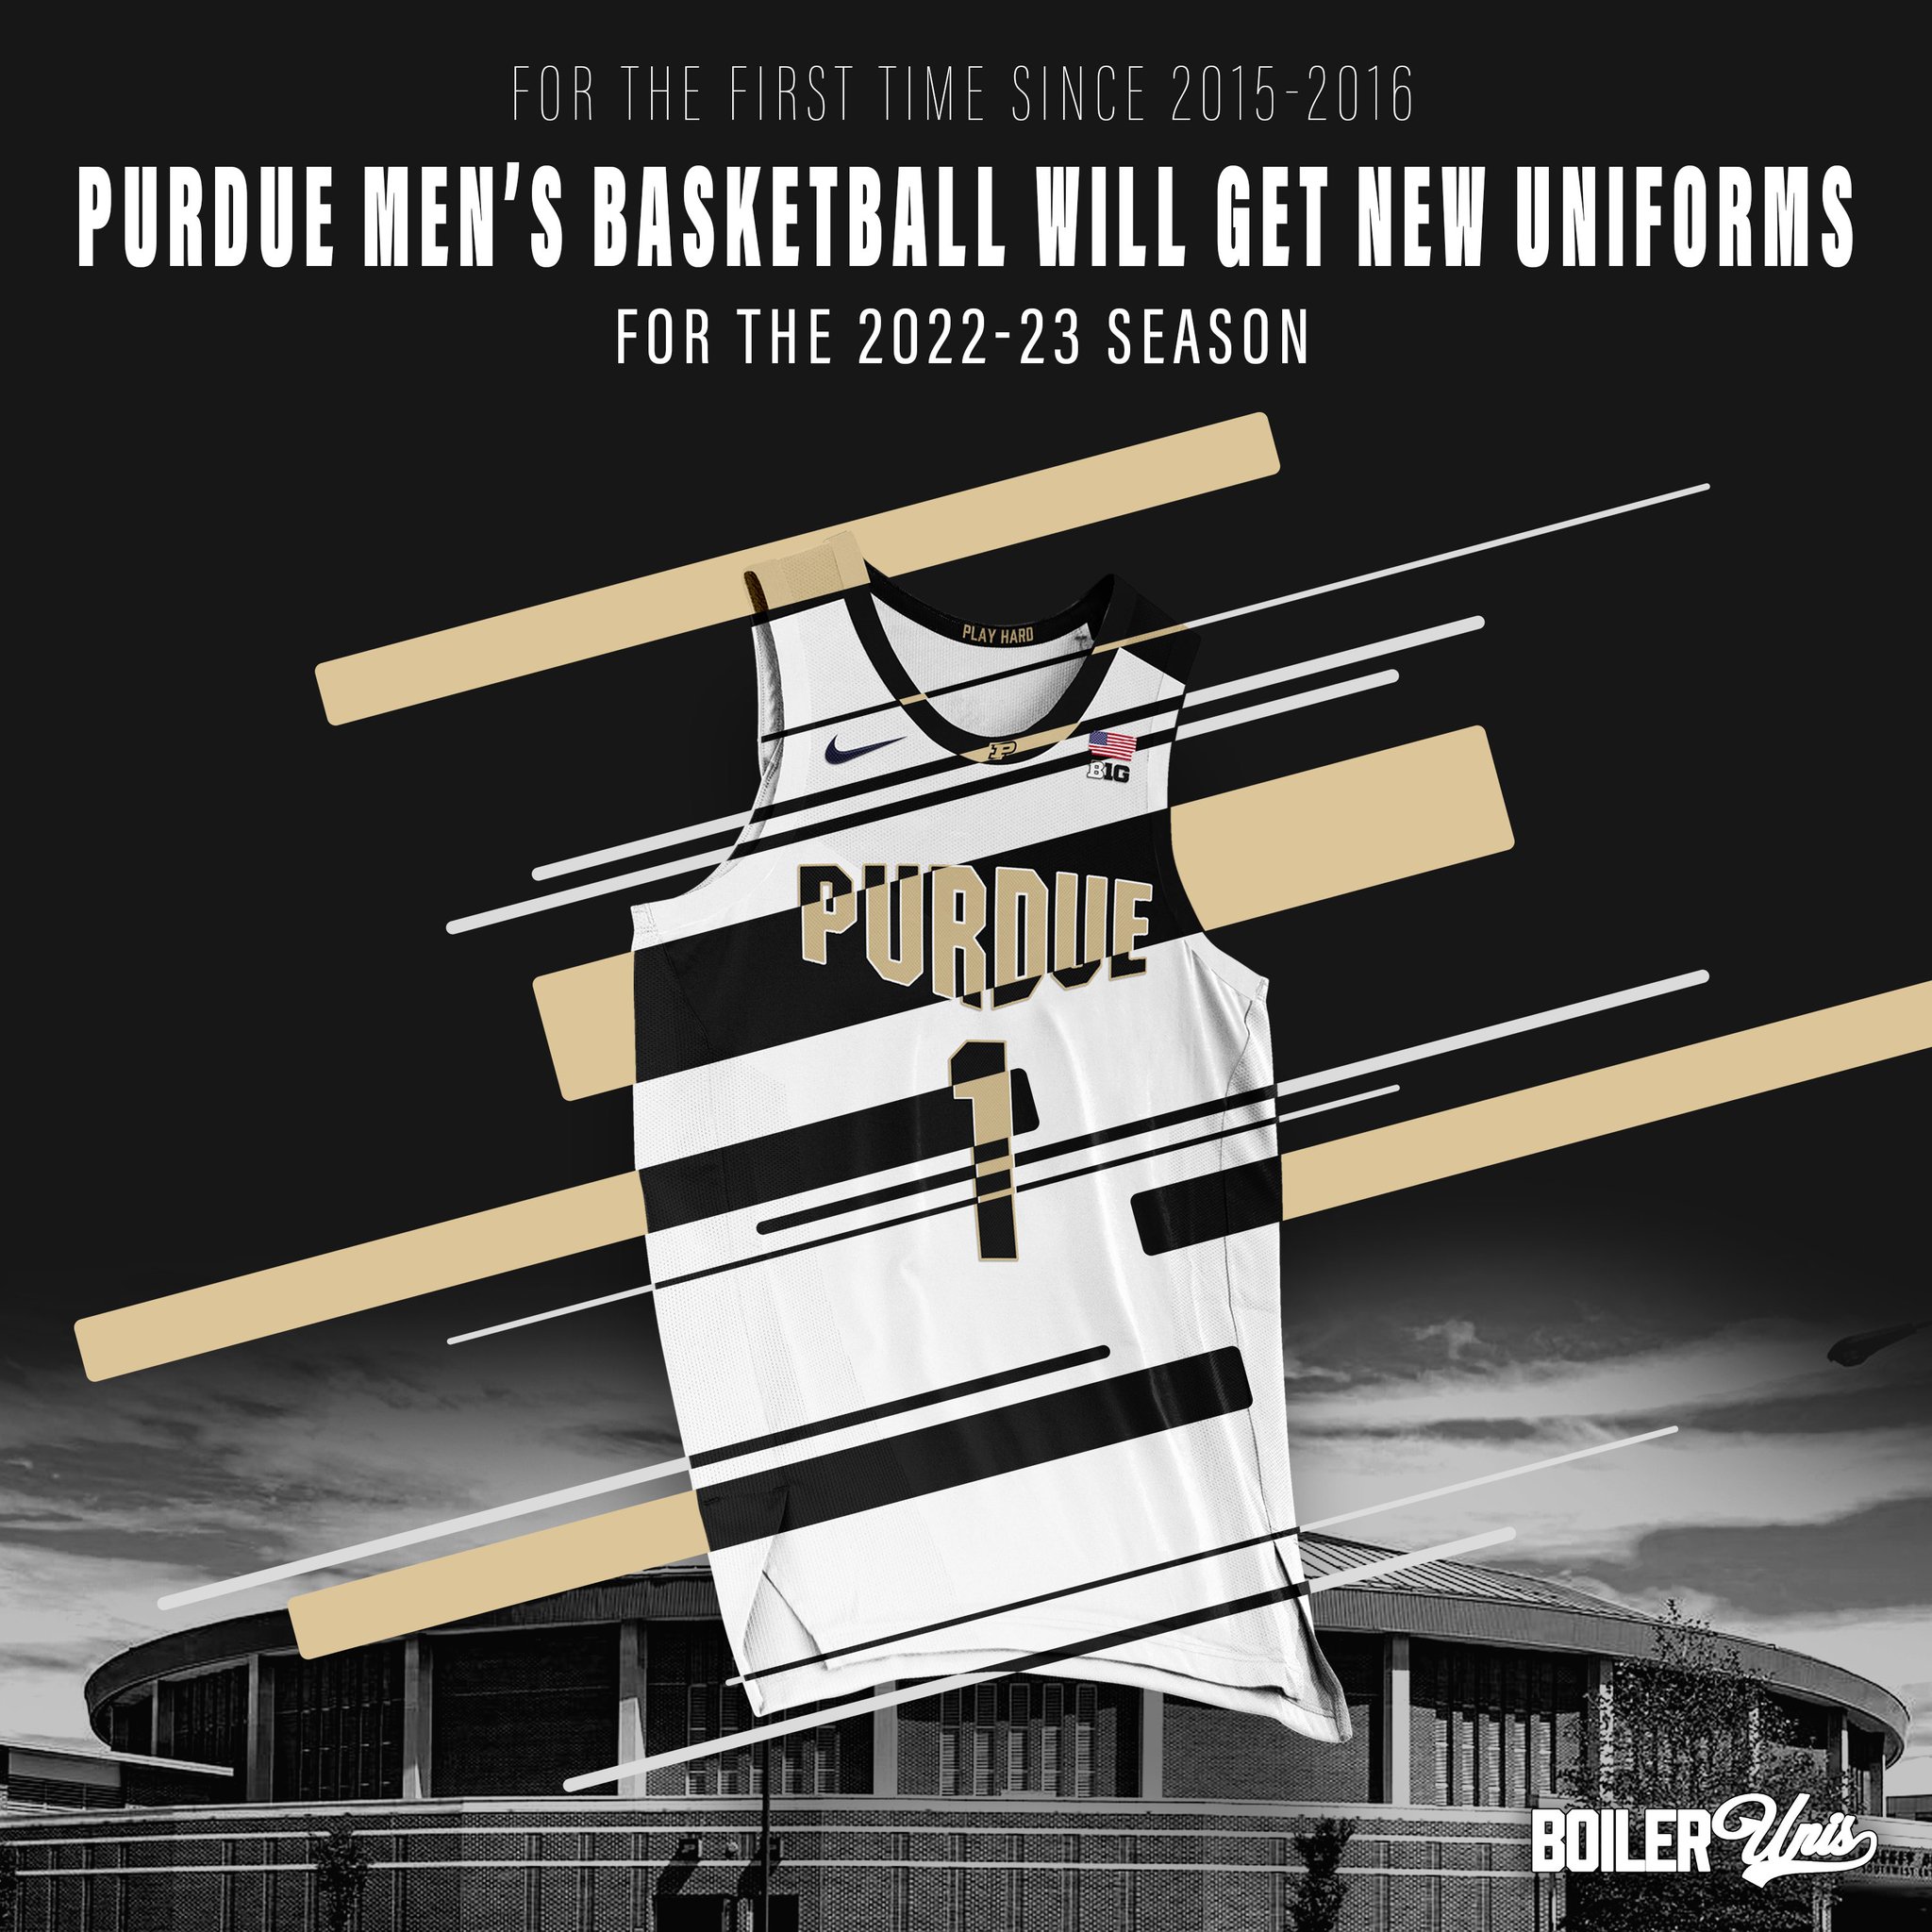 BoilerUniforms 🚂 on X: Based on what we have heard from a few sources,  Purdue Men's Basketball will retire the existing uniforms and debut a new  look for the first time since